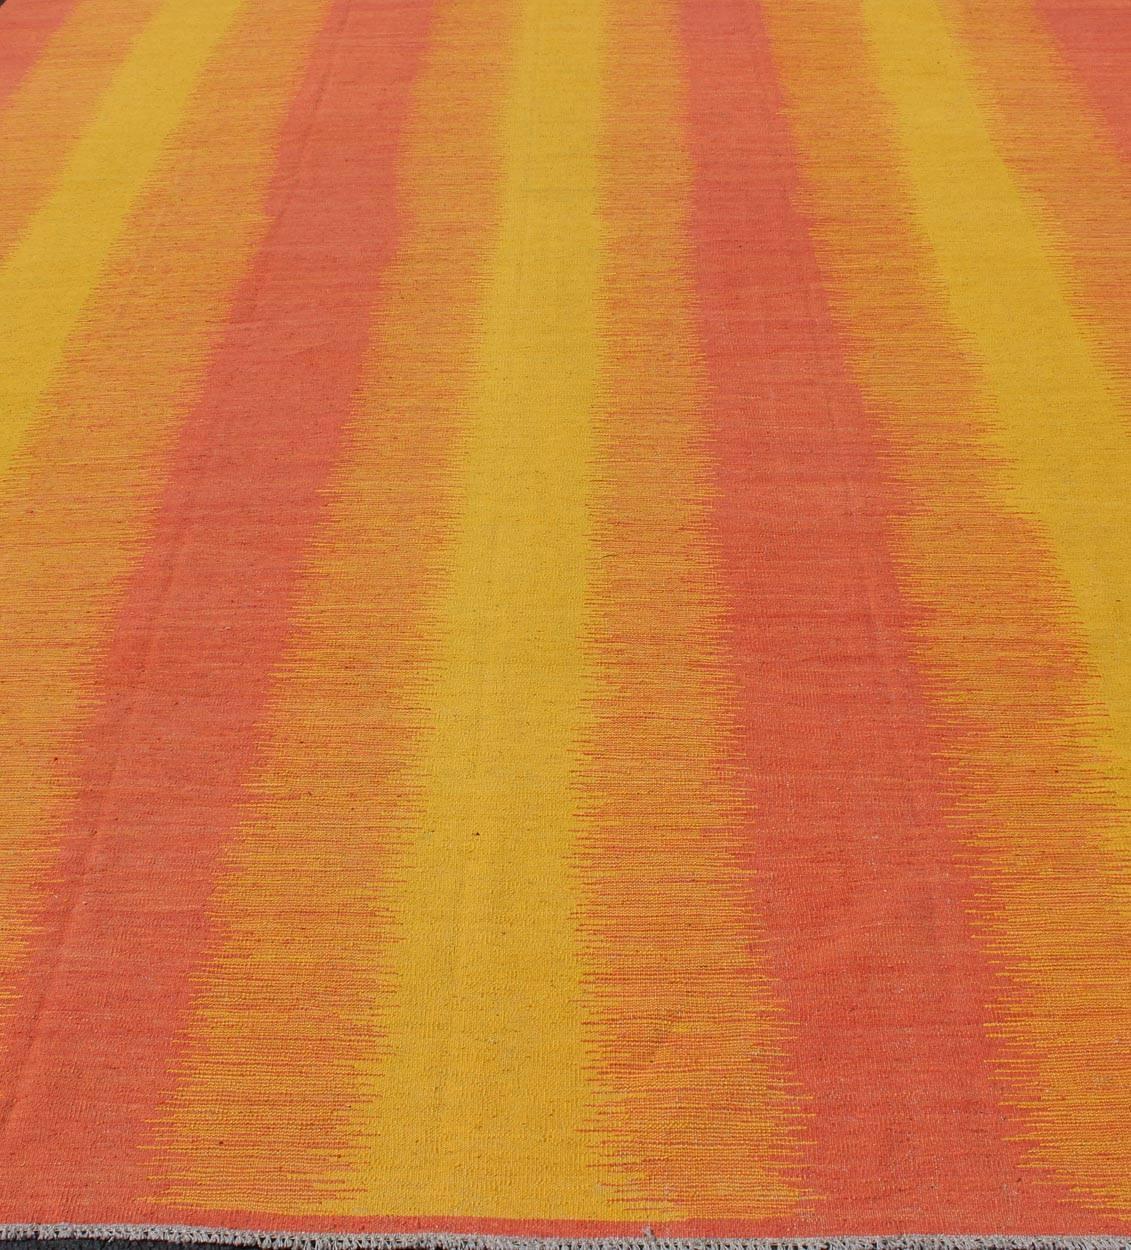 Sunset Striped Afghan Kilim Rug in Yellow, Orange, Pink For Sale 4